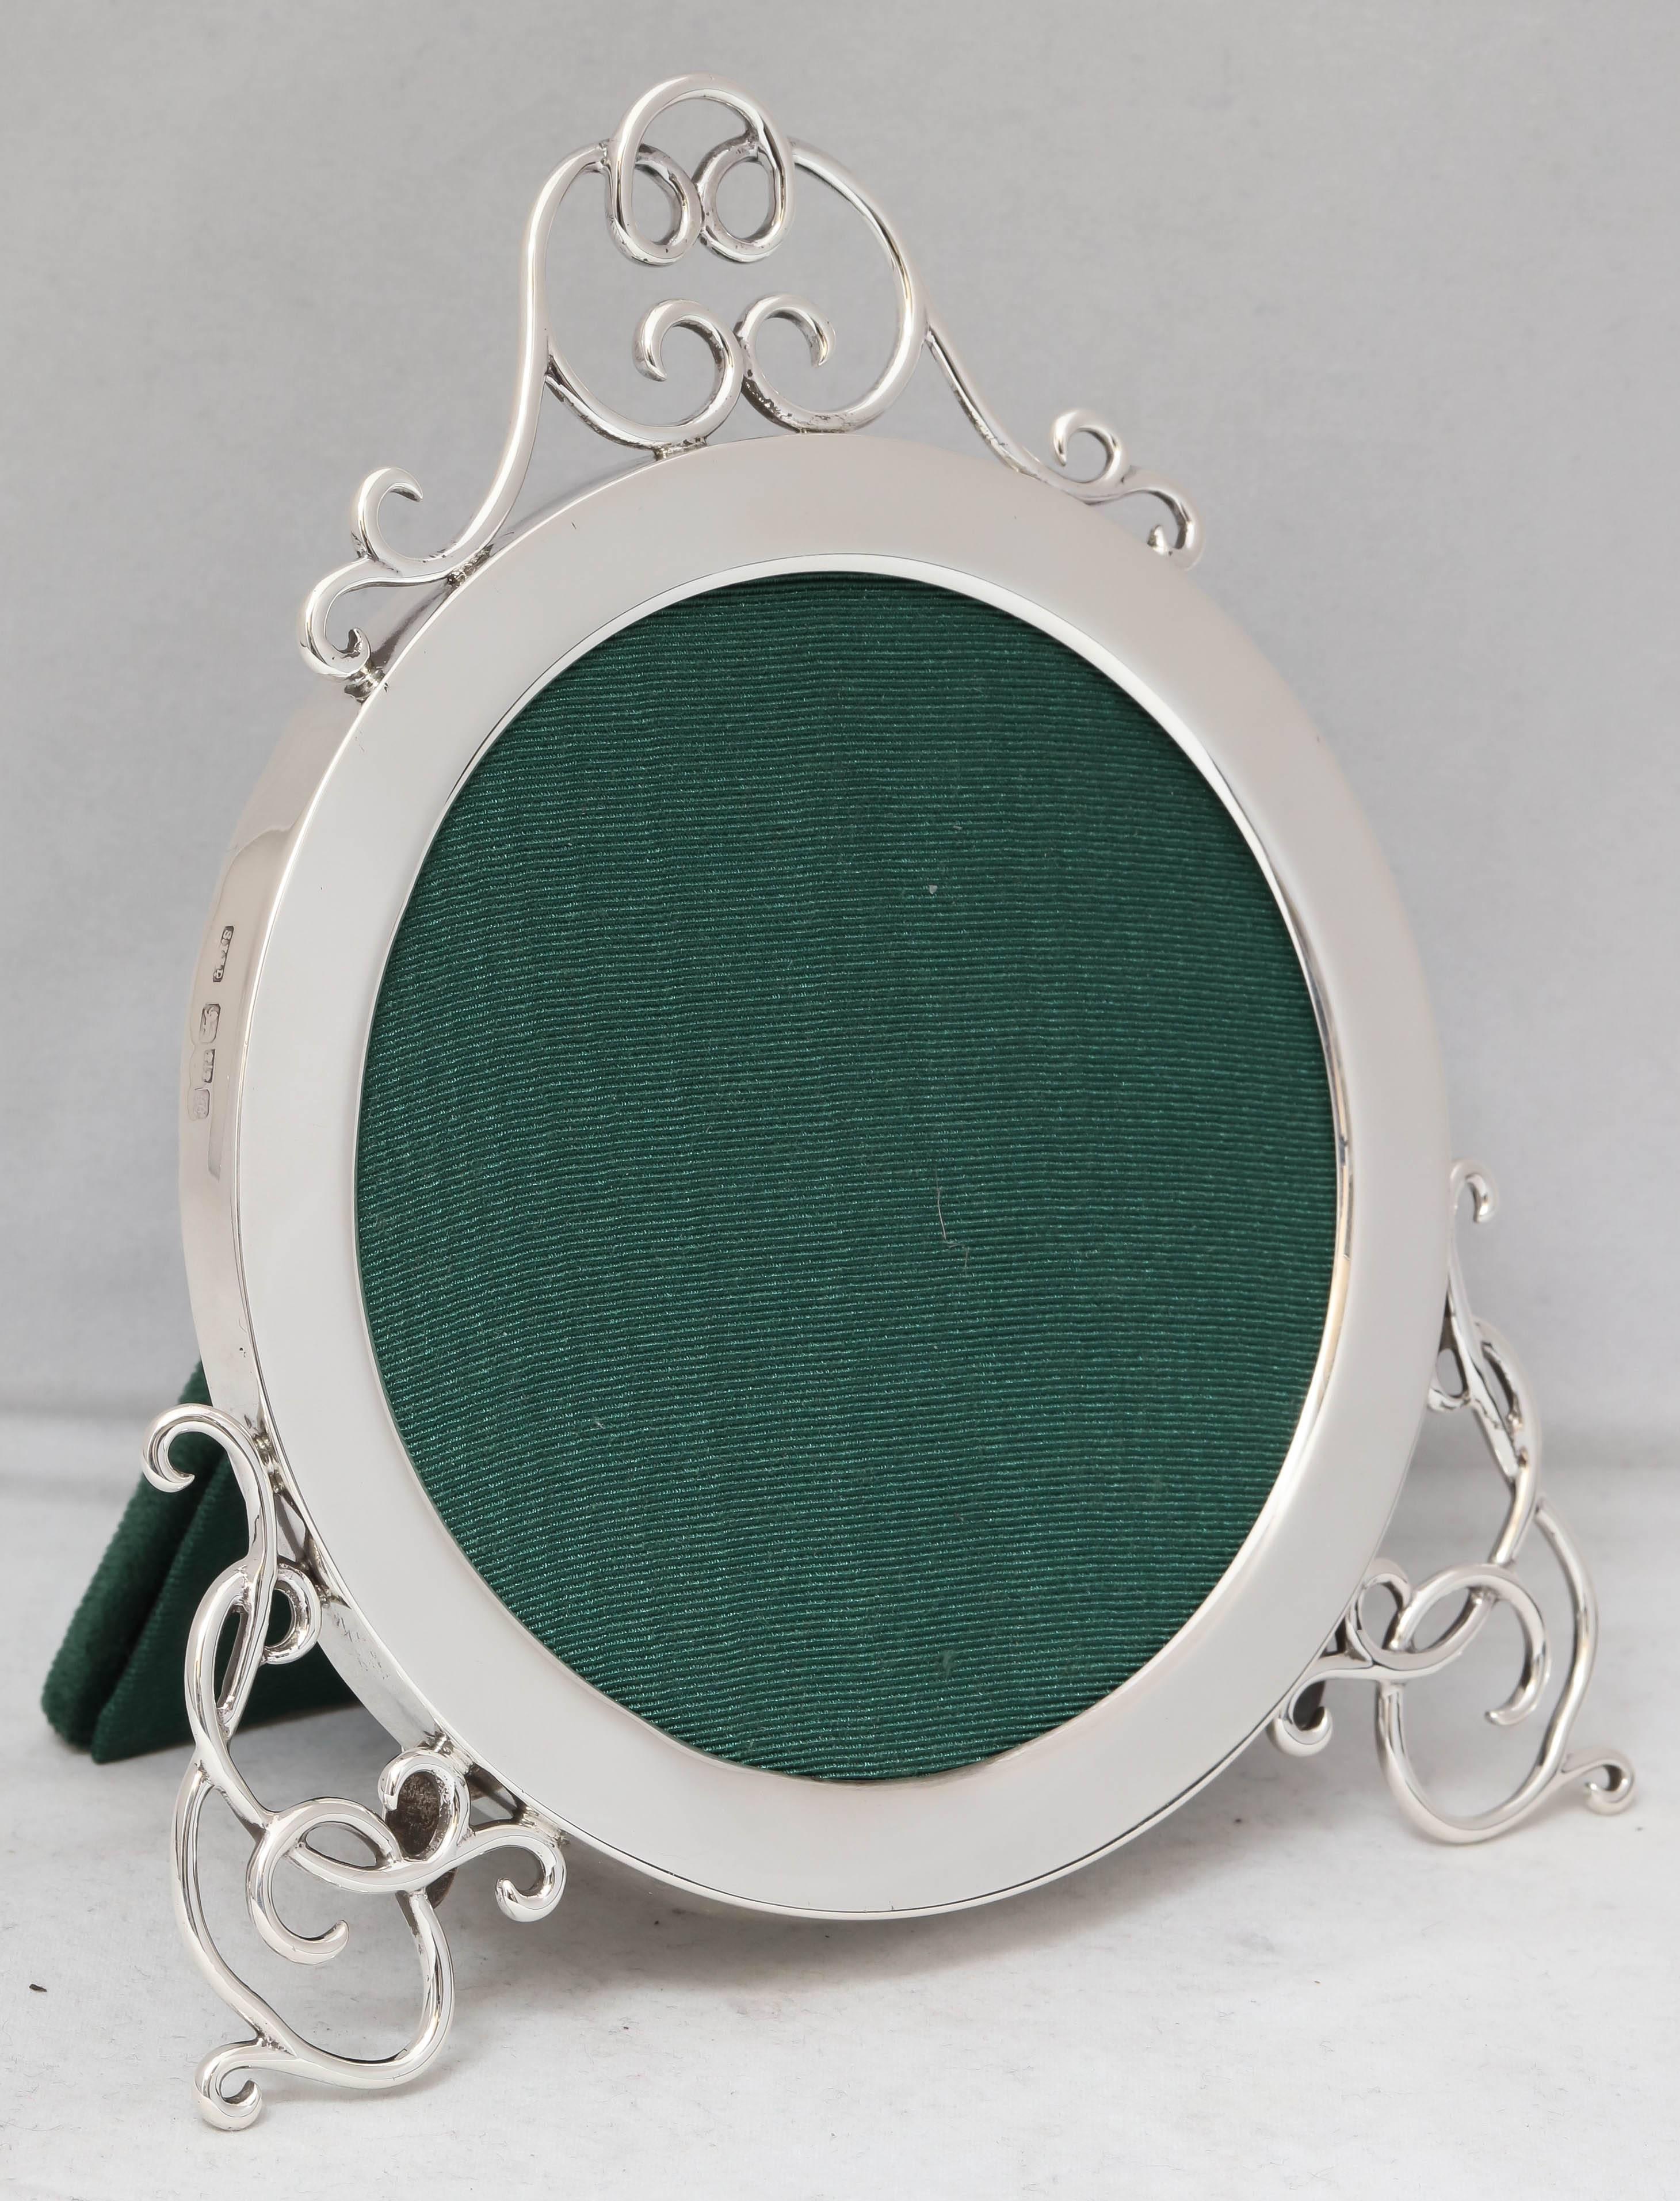 Unusual, Edwardian, sterling silver picture frame, Chester England, 1902, Stokes & Ireland, Ltd. makers. Beautiful sterling silver 